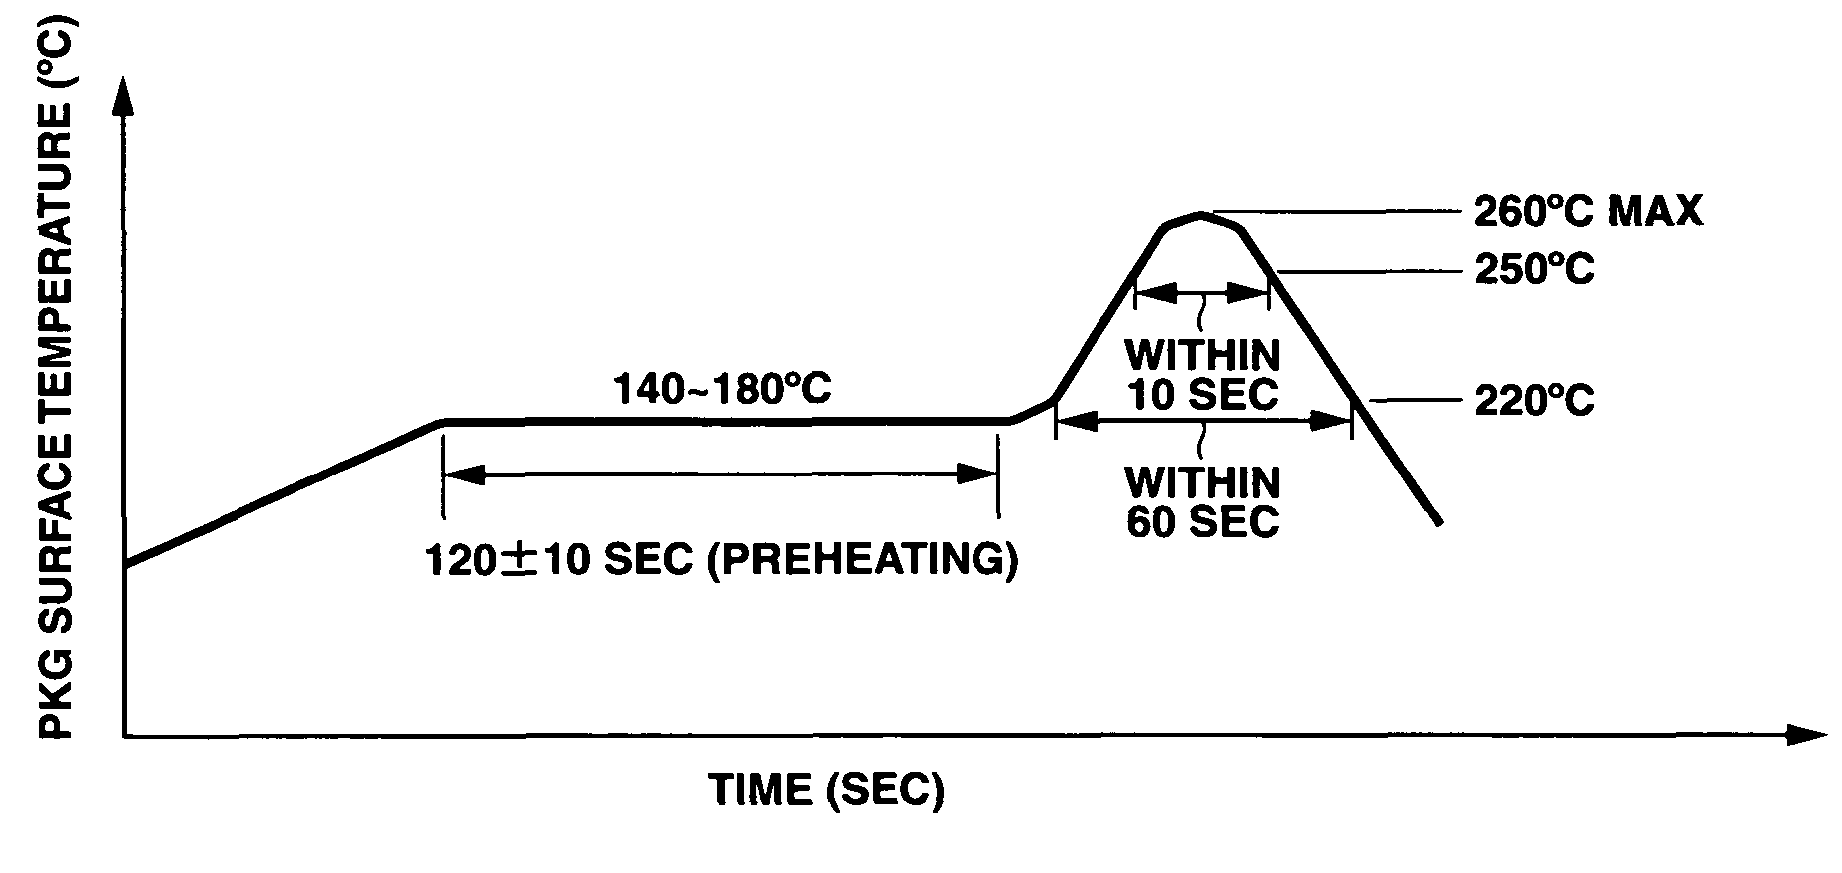 Semiconductor encapsulating epoxy resin composition and semiconductor device